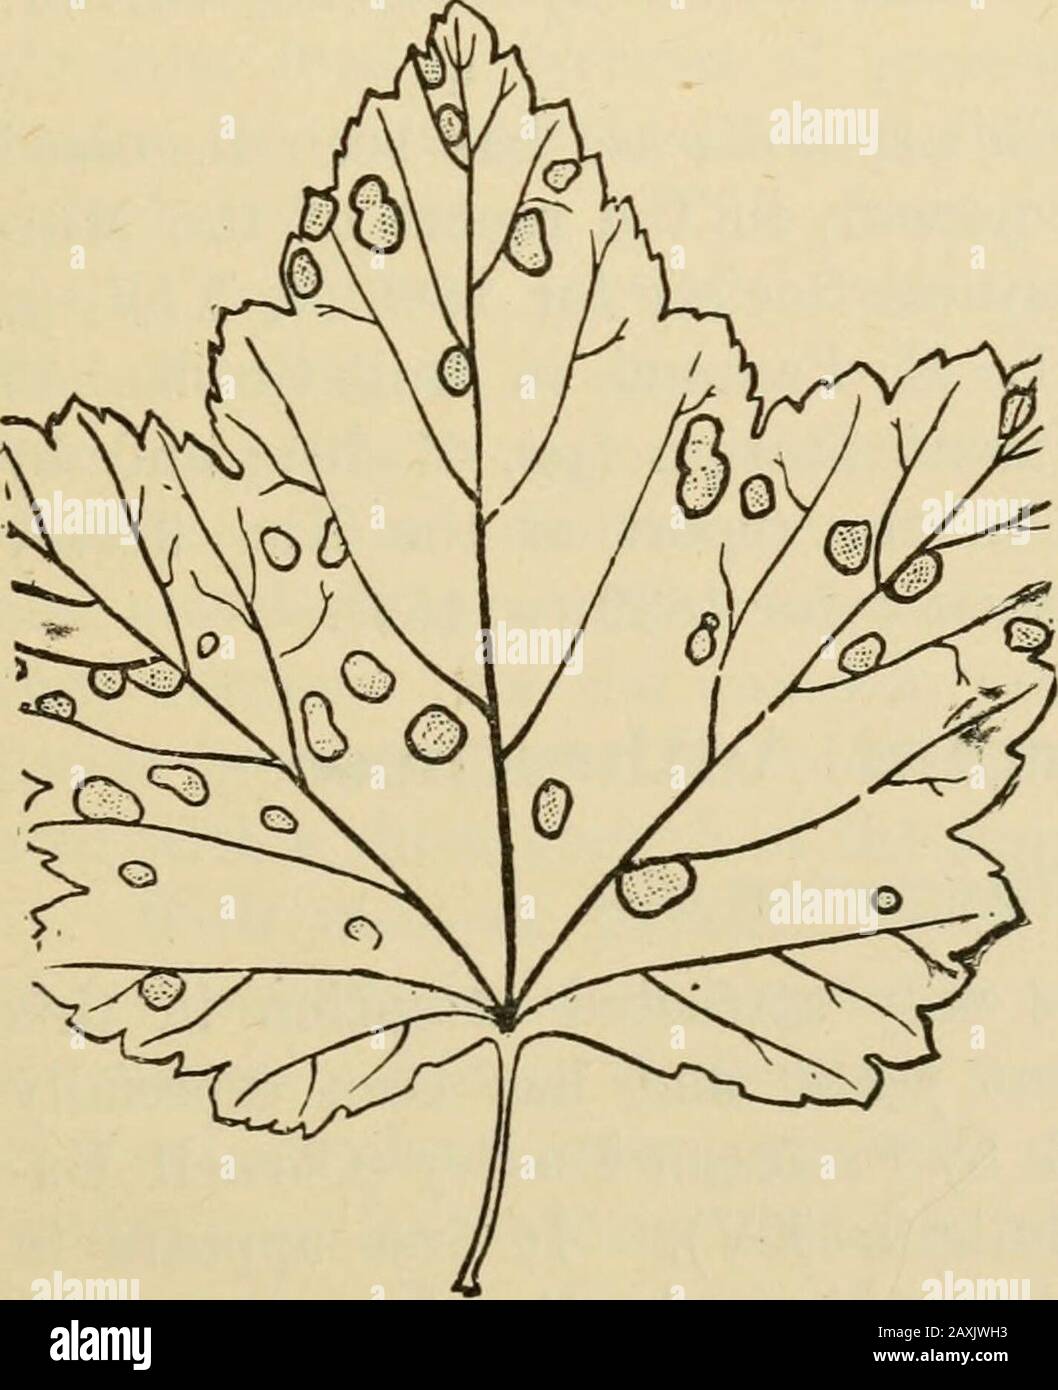 Fungi and fungicides; a practical manual, concerning the fungous diseases of cultivated plants and the means of preventing their ravages . an extendedaccount of grape anthracnose. Since then it has beenfrequently treated of in The Journal of Mycology, andin experiment station bulletins and reports. FUNGI AFFECTING THE CURRANT AND GOOSEBERRY The Leaf=spot Disease Septoria ribis and Cercospora angulata The foliage of currants and gooseberries is oftenattacked early in summer by two or more species offungi, which produce small brownish spots, at first oftenno larger than a pin head, but gradually Stock Photo